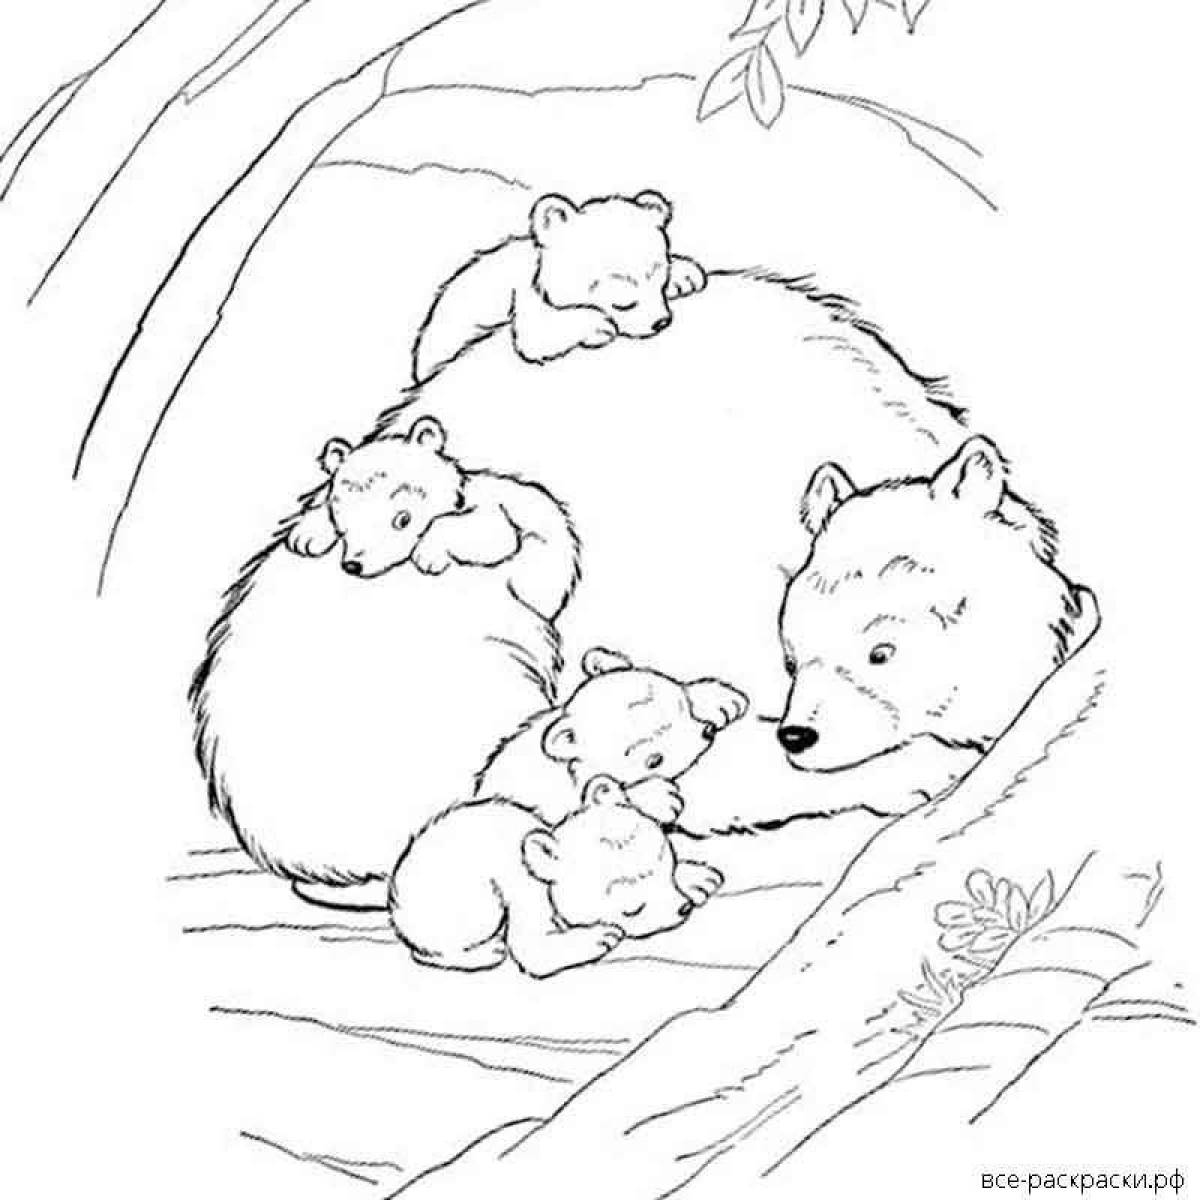 Puzzled bear in a den coloring book